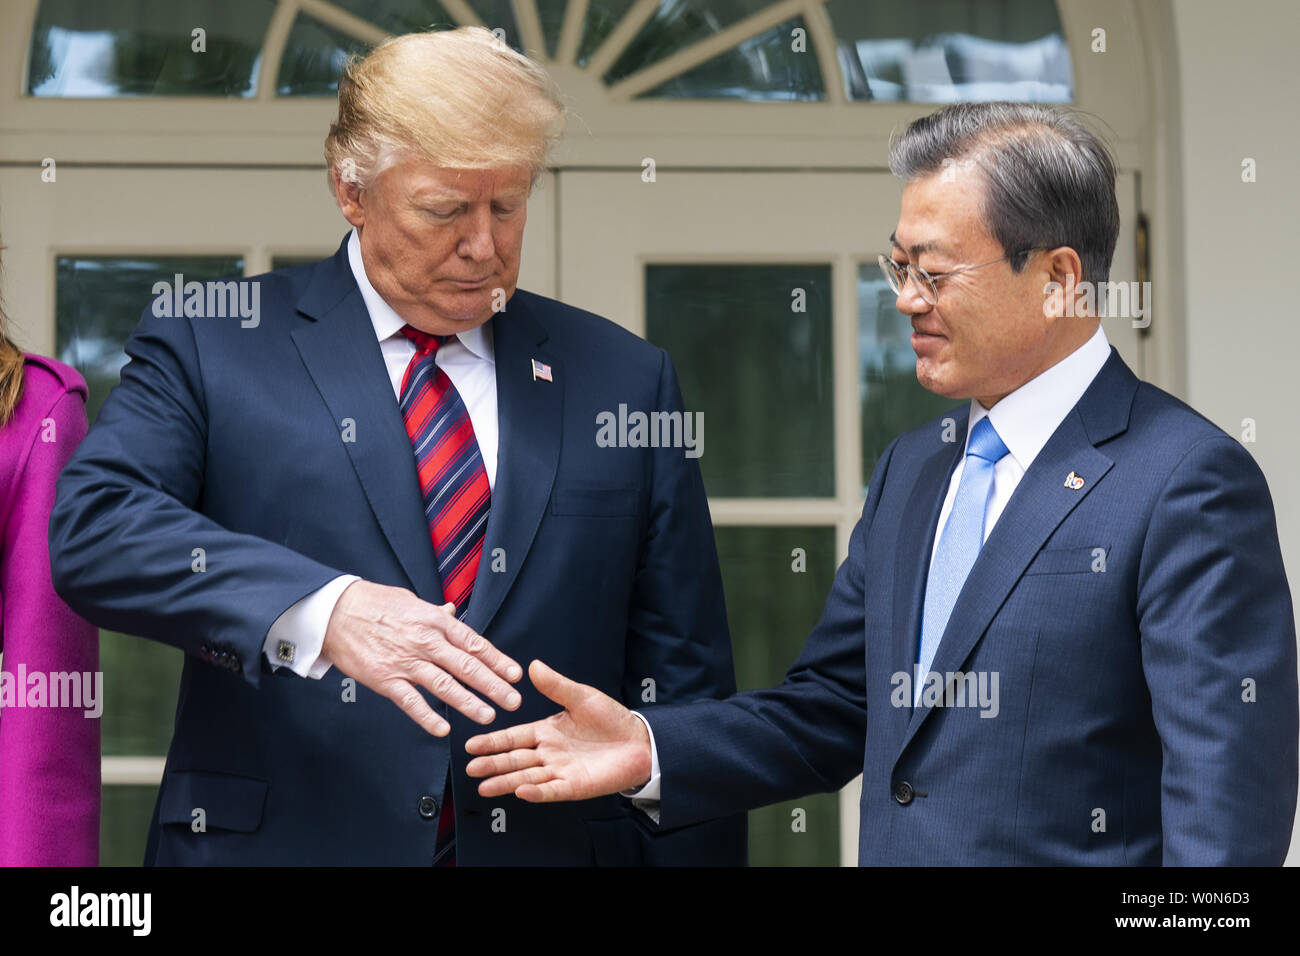 US President Donald J. Trump (L) and Korean President Moon Jae-in (R) shake hands in the Colonnade of the White House in Washington on April 11, 2019. President Moon is expected to ask President Trump to reduce sanctions on North Korea in an attempt to jump start nuclear negotiations between North Korea and the US.  Photo by Jim Lo Scalzo/UPI Stock Photo